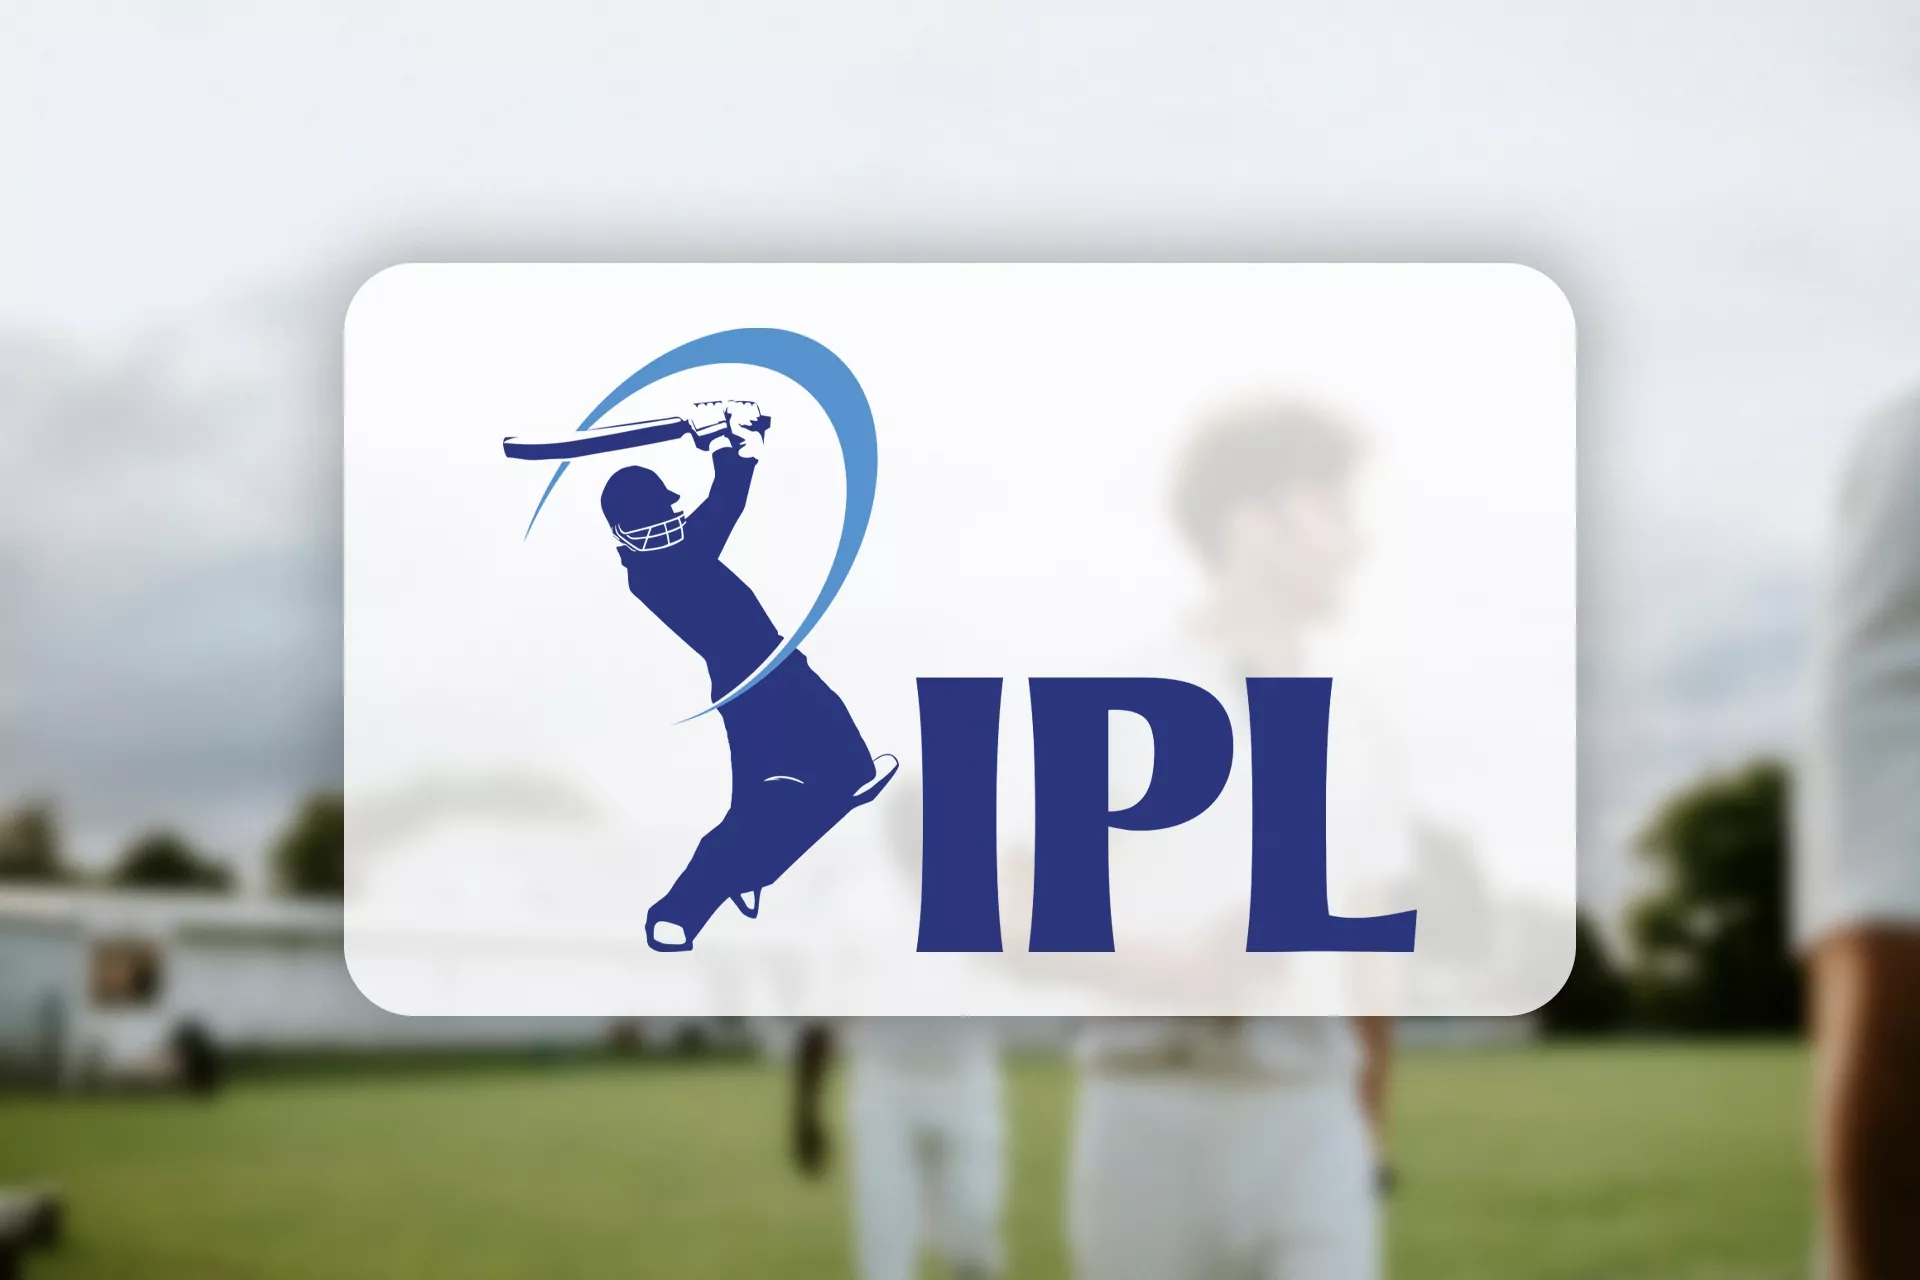 IPL is a professional cricket tournament that is always held in India.